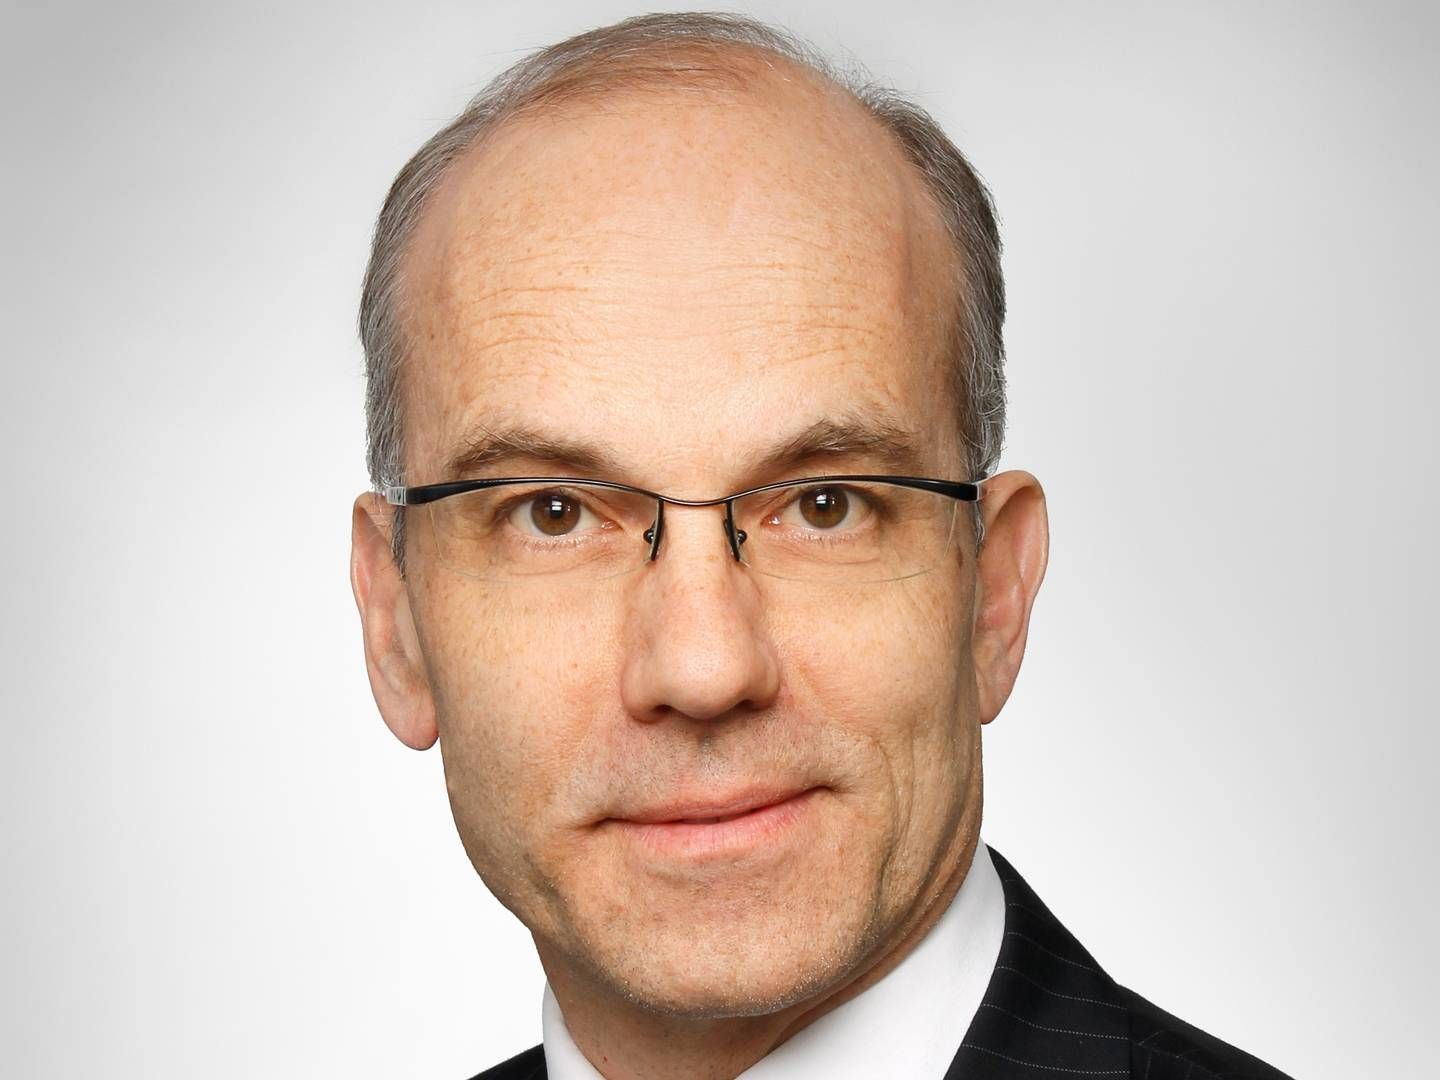 Timo Löyttyniemi, CEO of State Pension Fund of Finland.